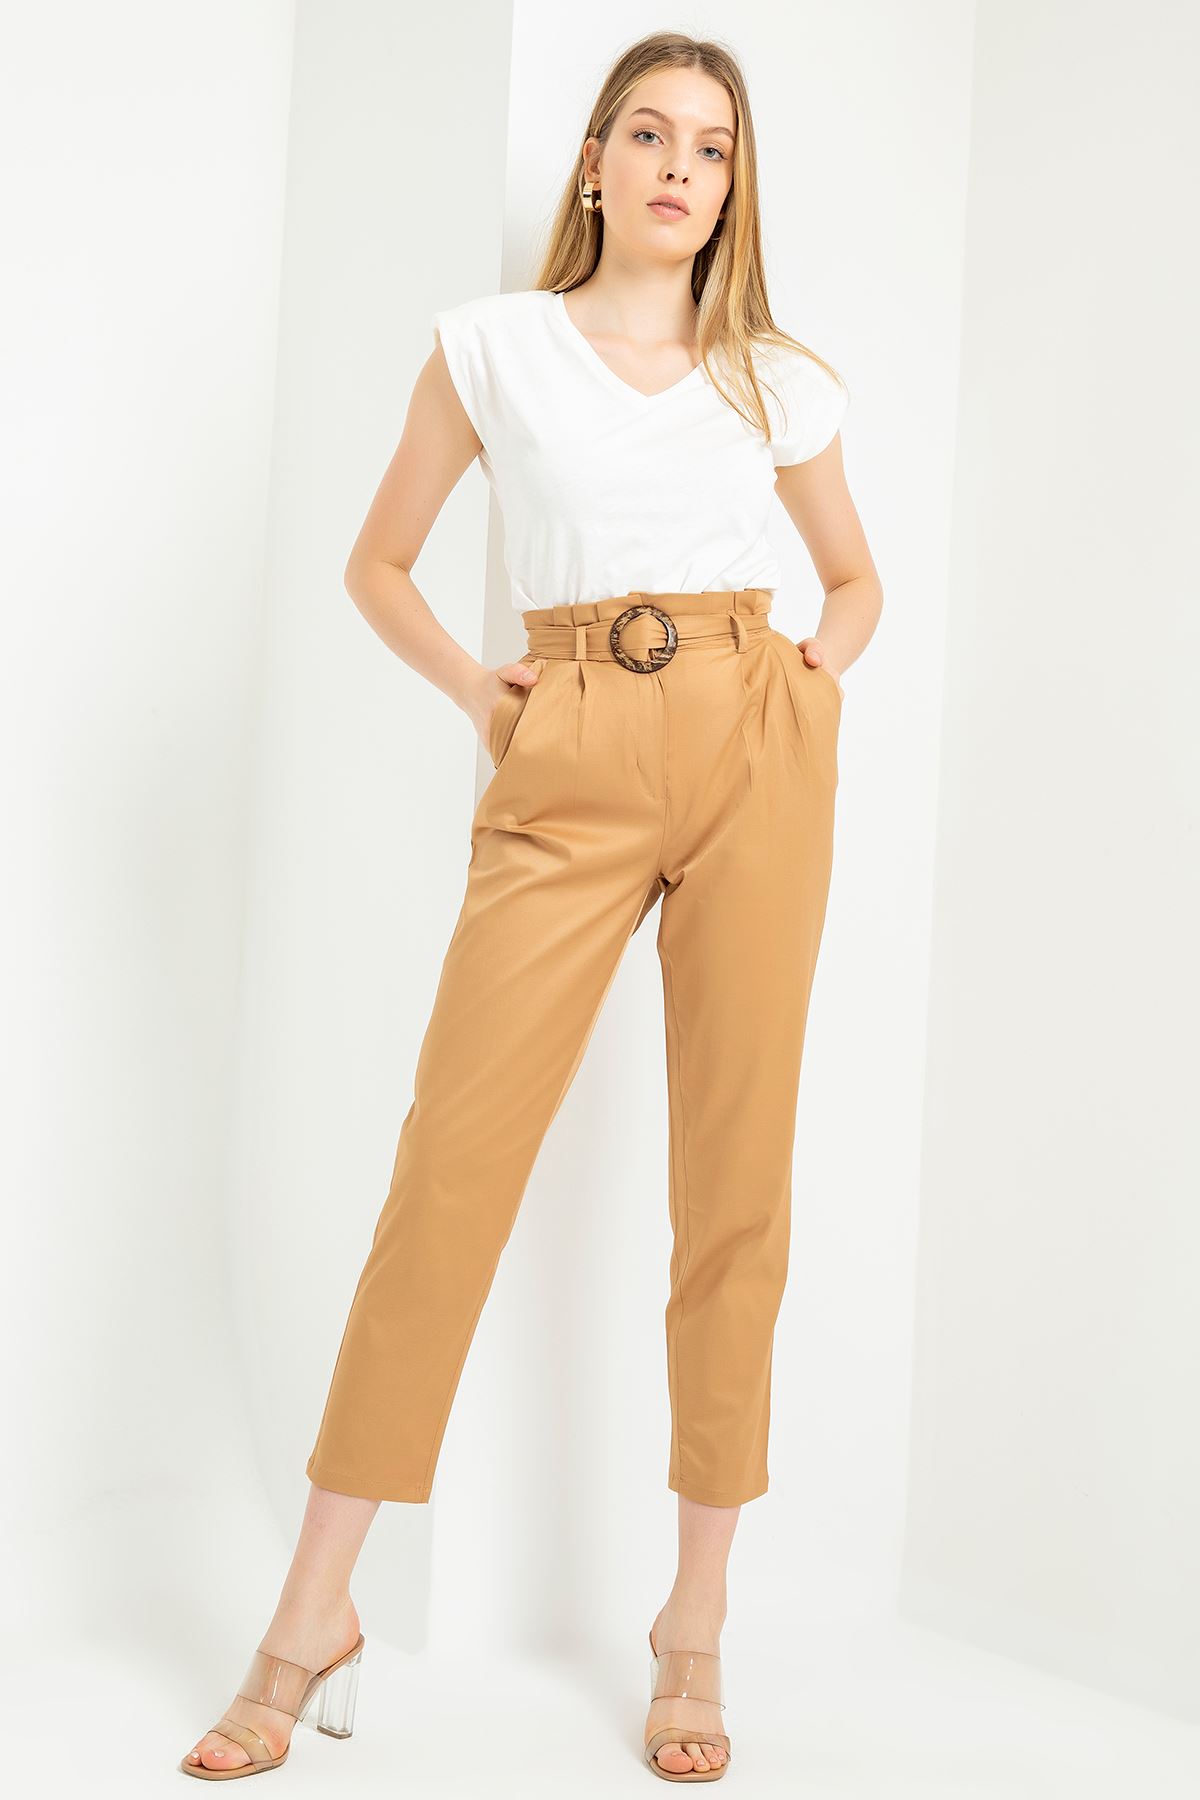 Woven Fabric Ankle Length Carrot Style Belted Women'S Trouser - Light Brown